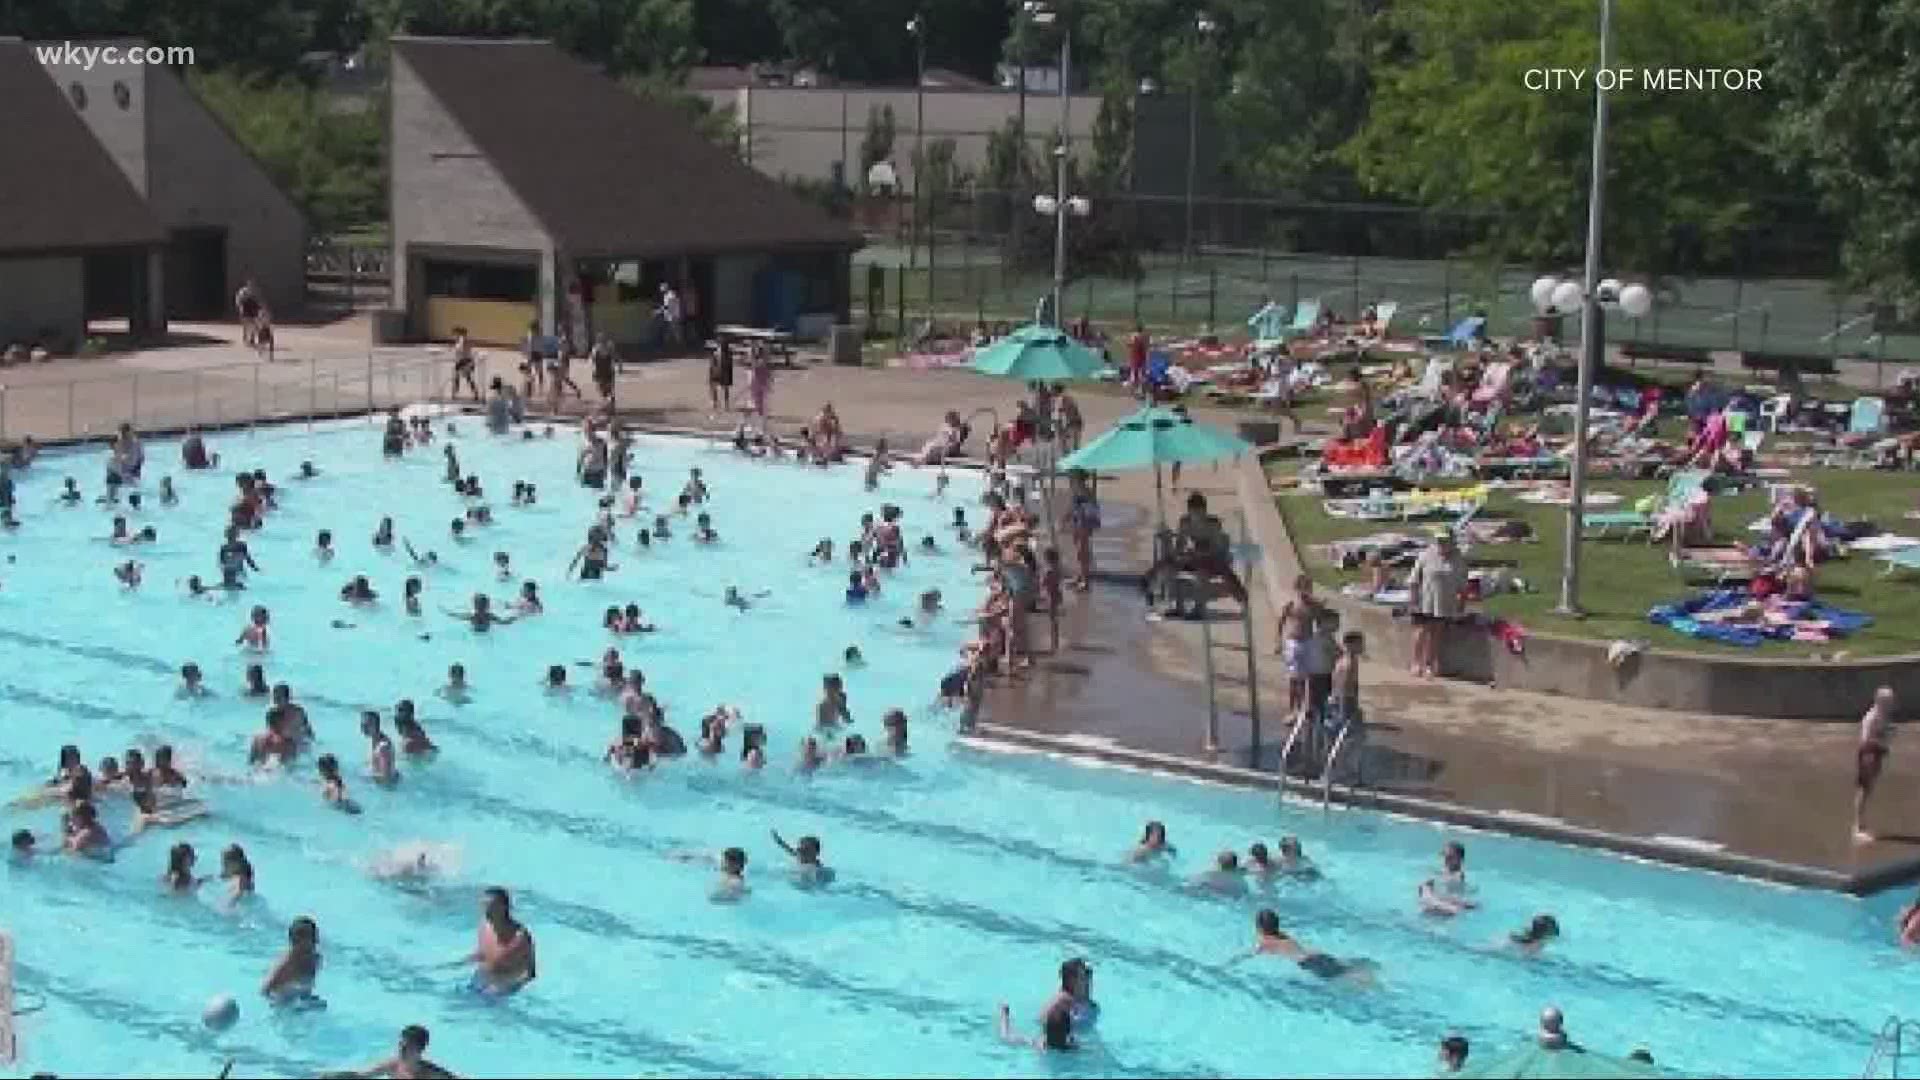 Pools will be allowed to reopen at the end of the month, but many cities are hesitating. Lynna Lai reports.